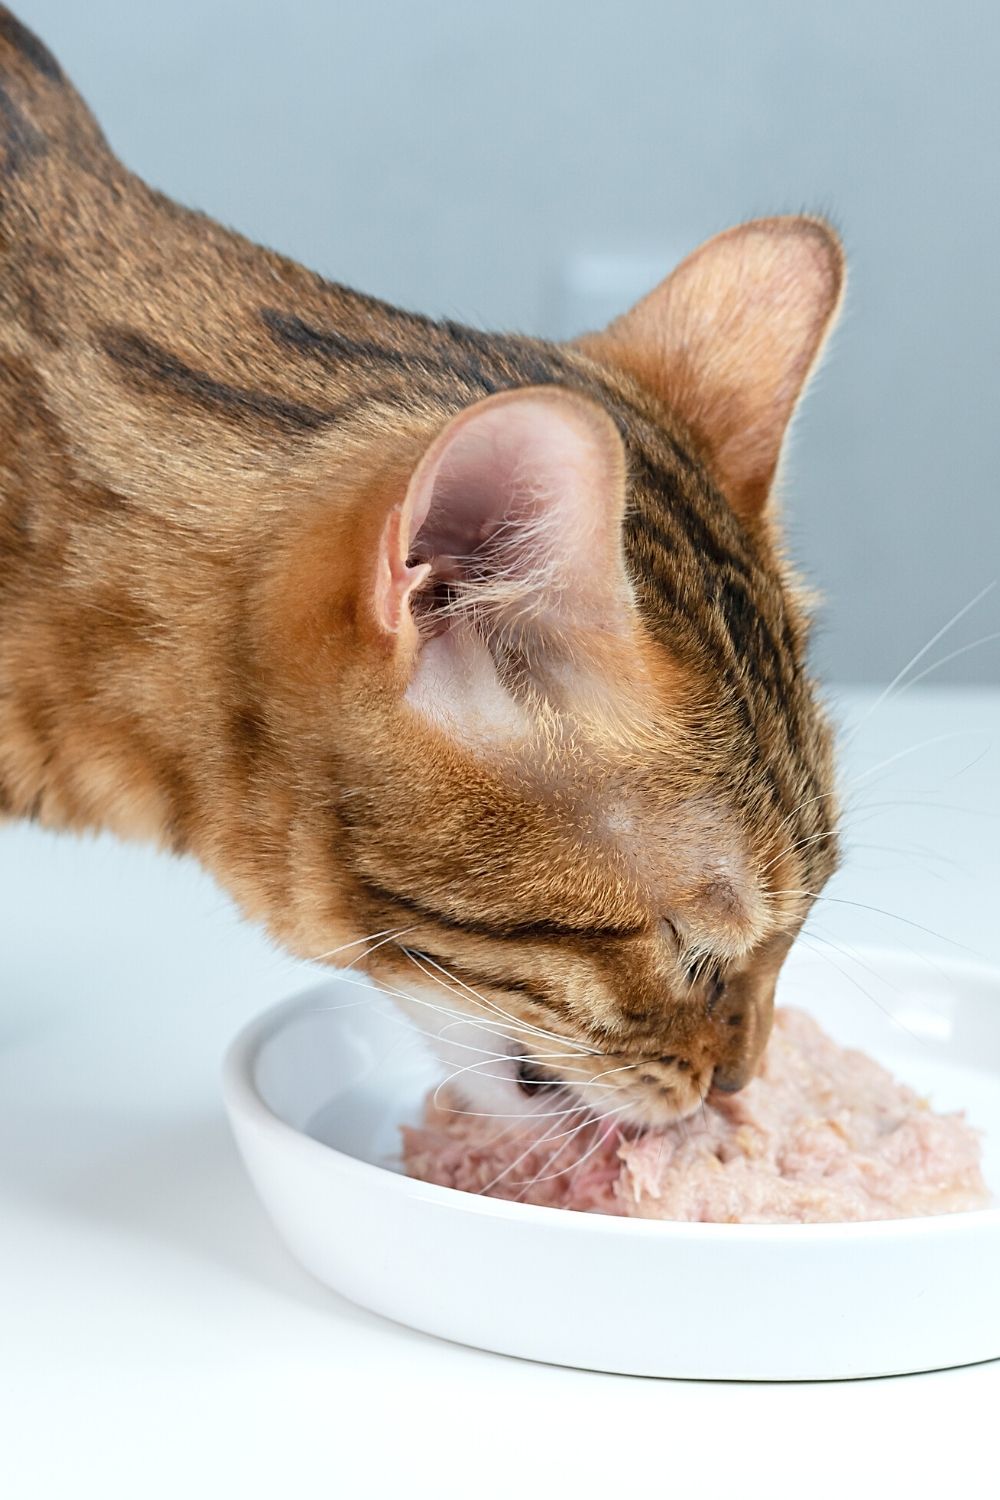 Some cat food are fish-flavored to help improve a feline's appetite